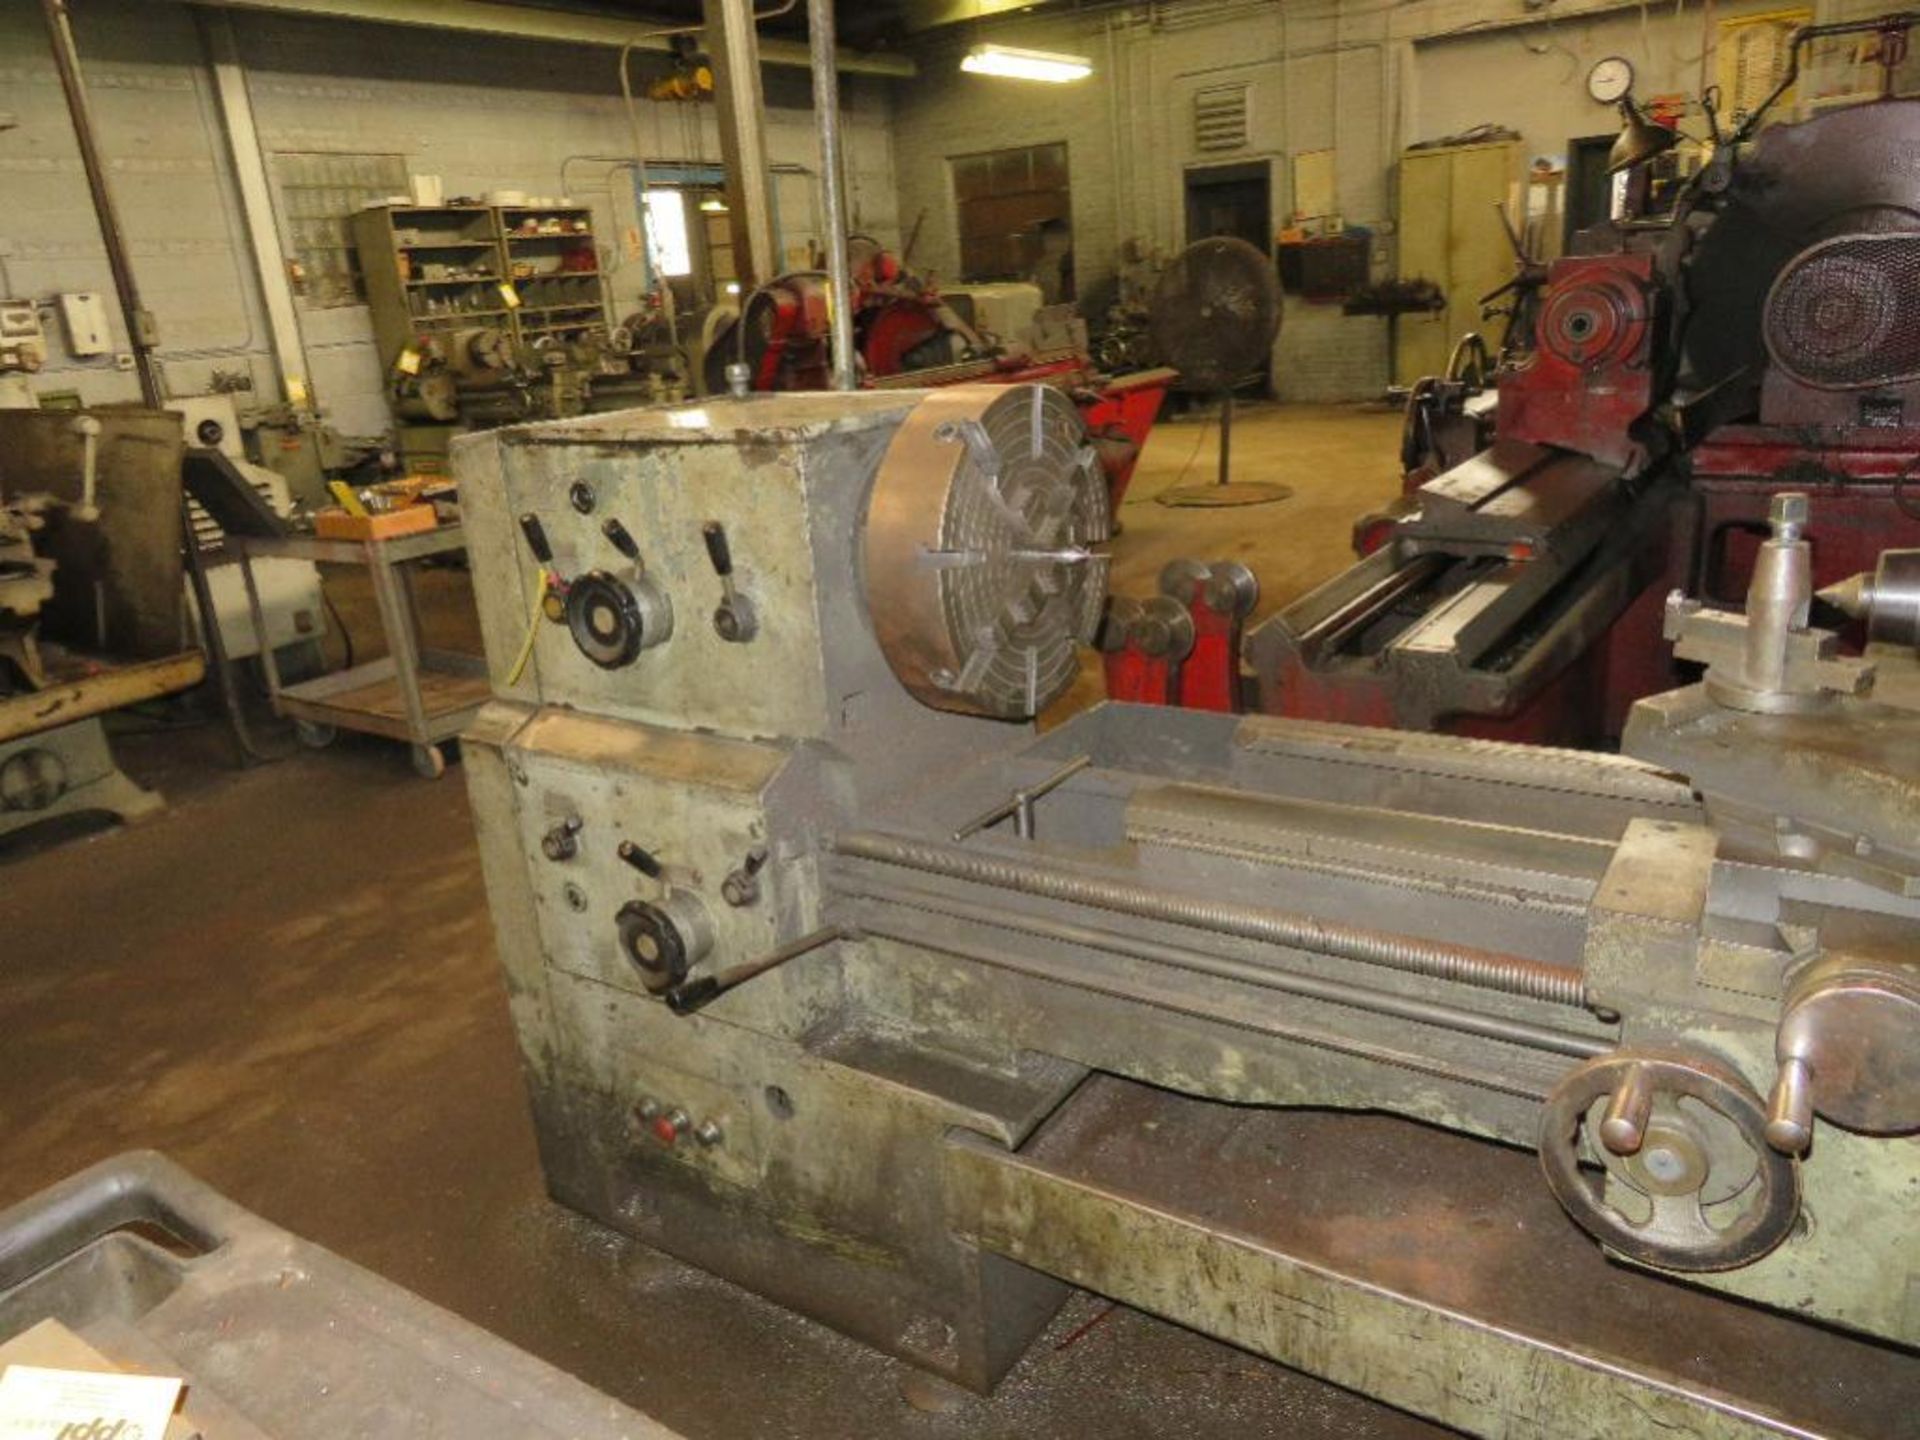 Polamco 19 in. x 68 in. Gap Bed Geared Head Engine Lathe, S/N N/A, 15 in. 4-Jaw Chuck, Carriage with - Image 3 of 3